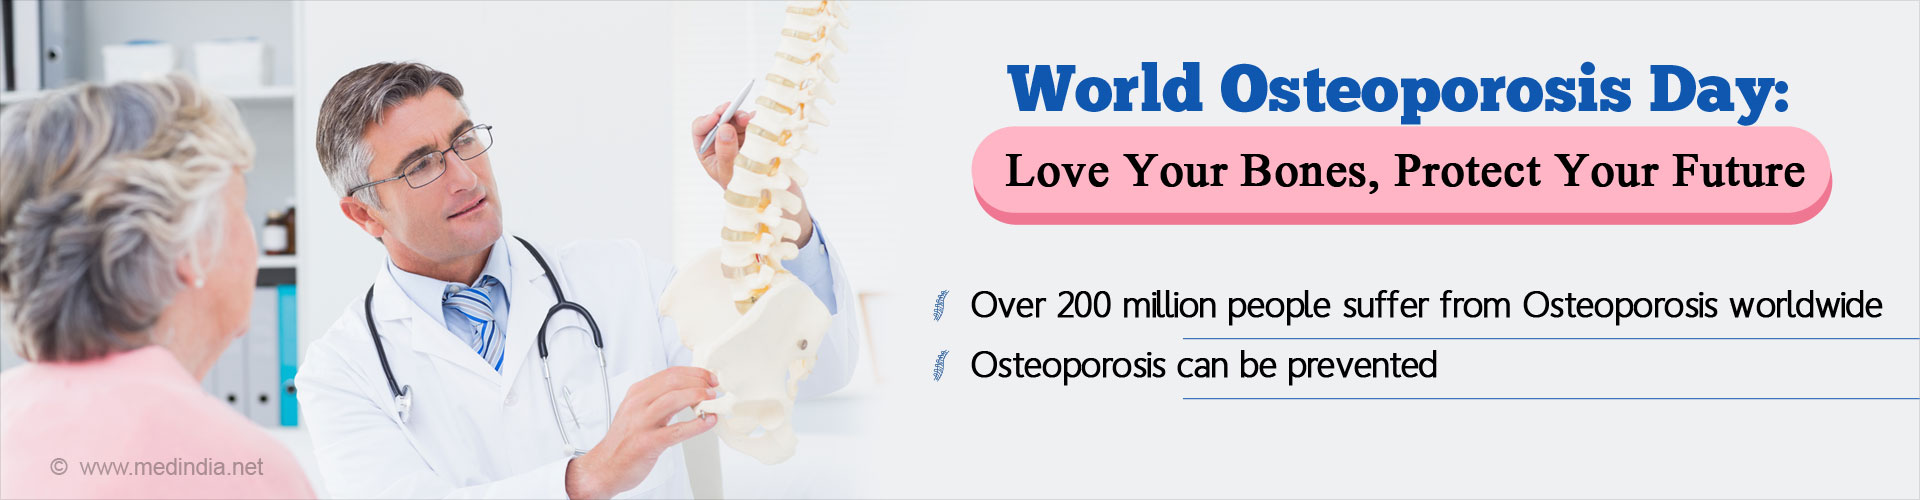 World Osteoporosis Day: Love Your Bones, Protect Your Future
- Over 200 million people suffer from osteoporosis worldwide
- Osteoporosis can be prevented